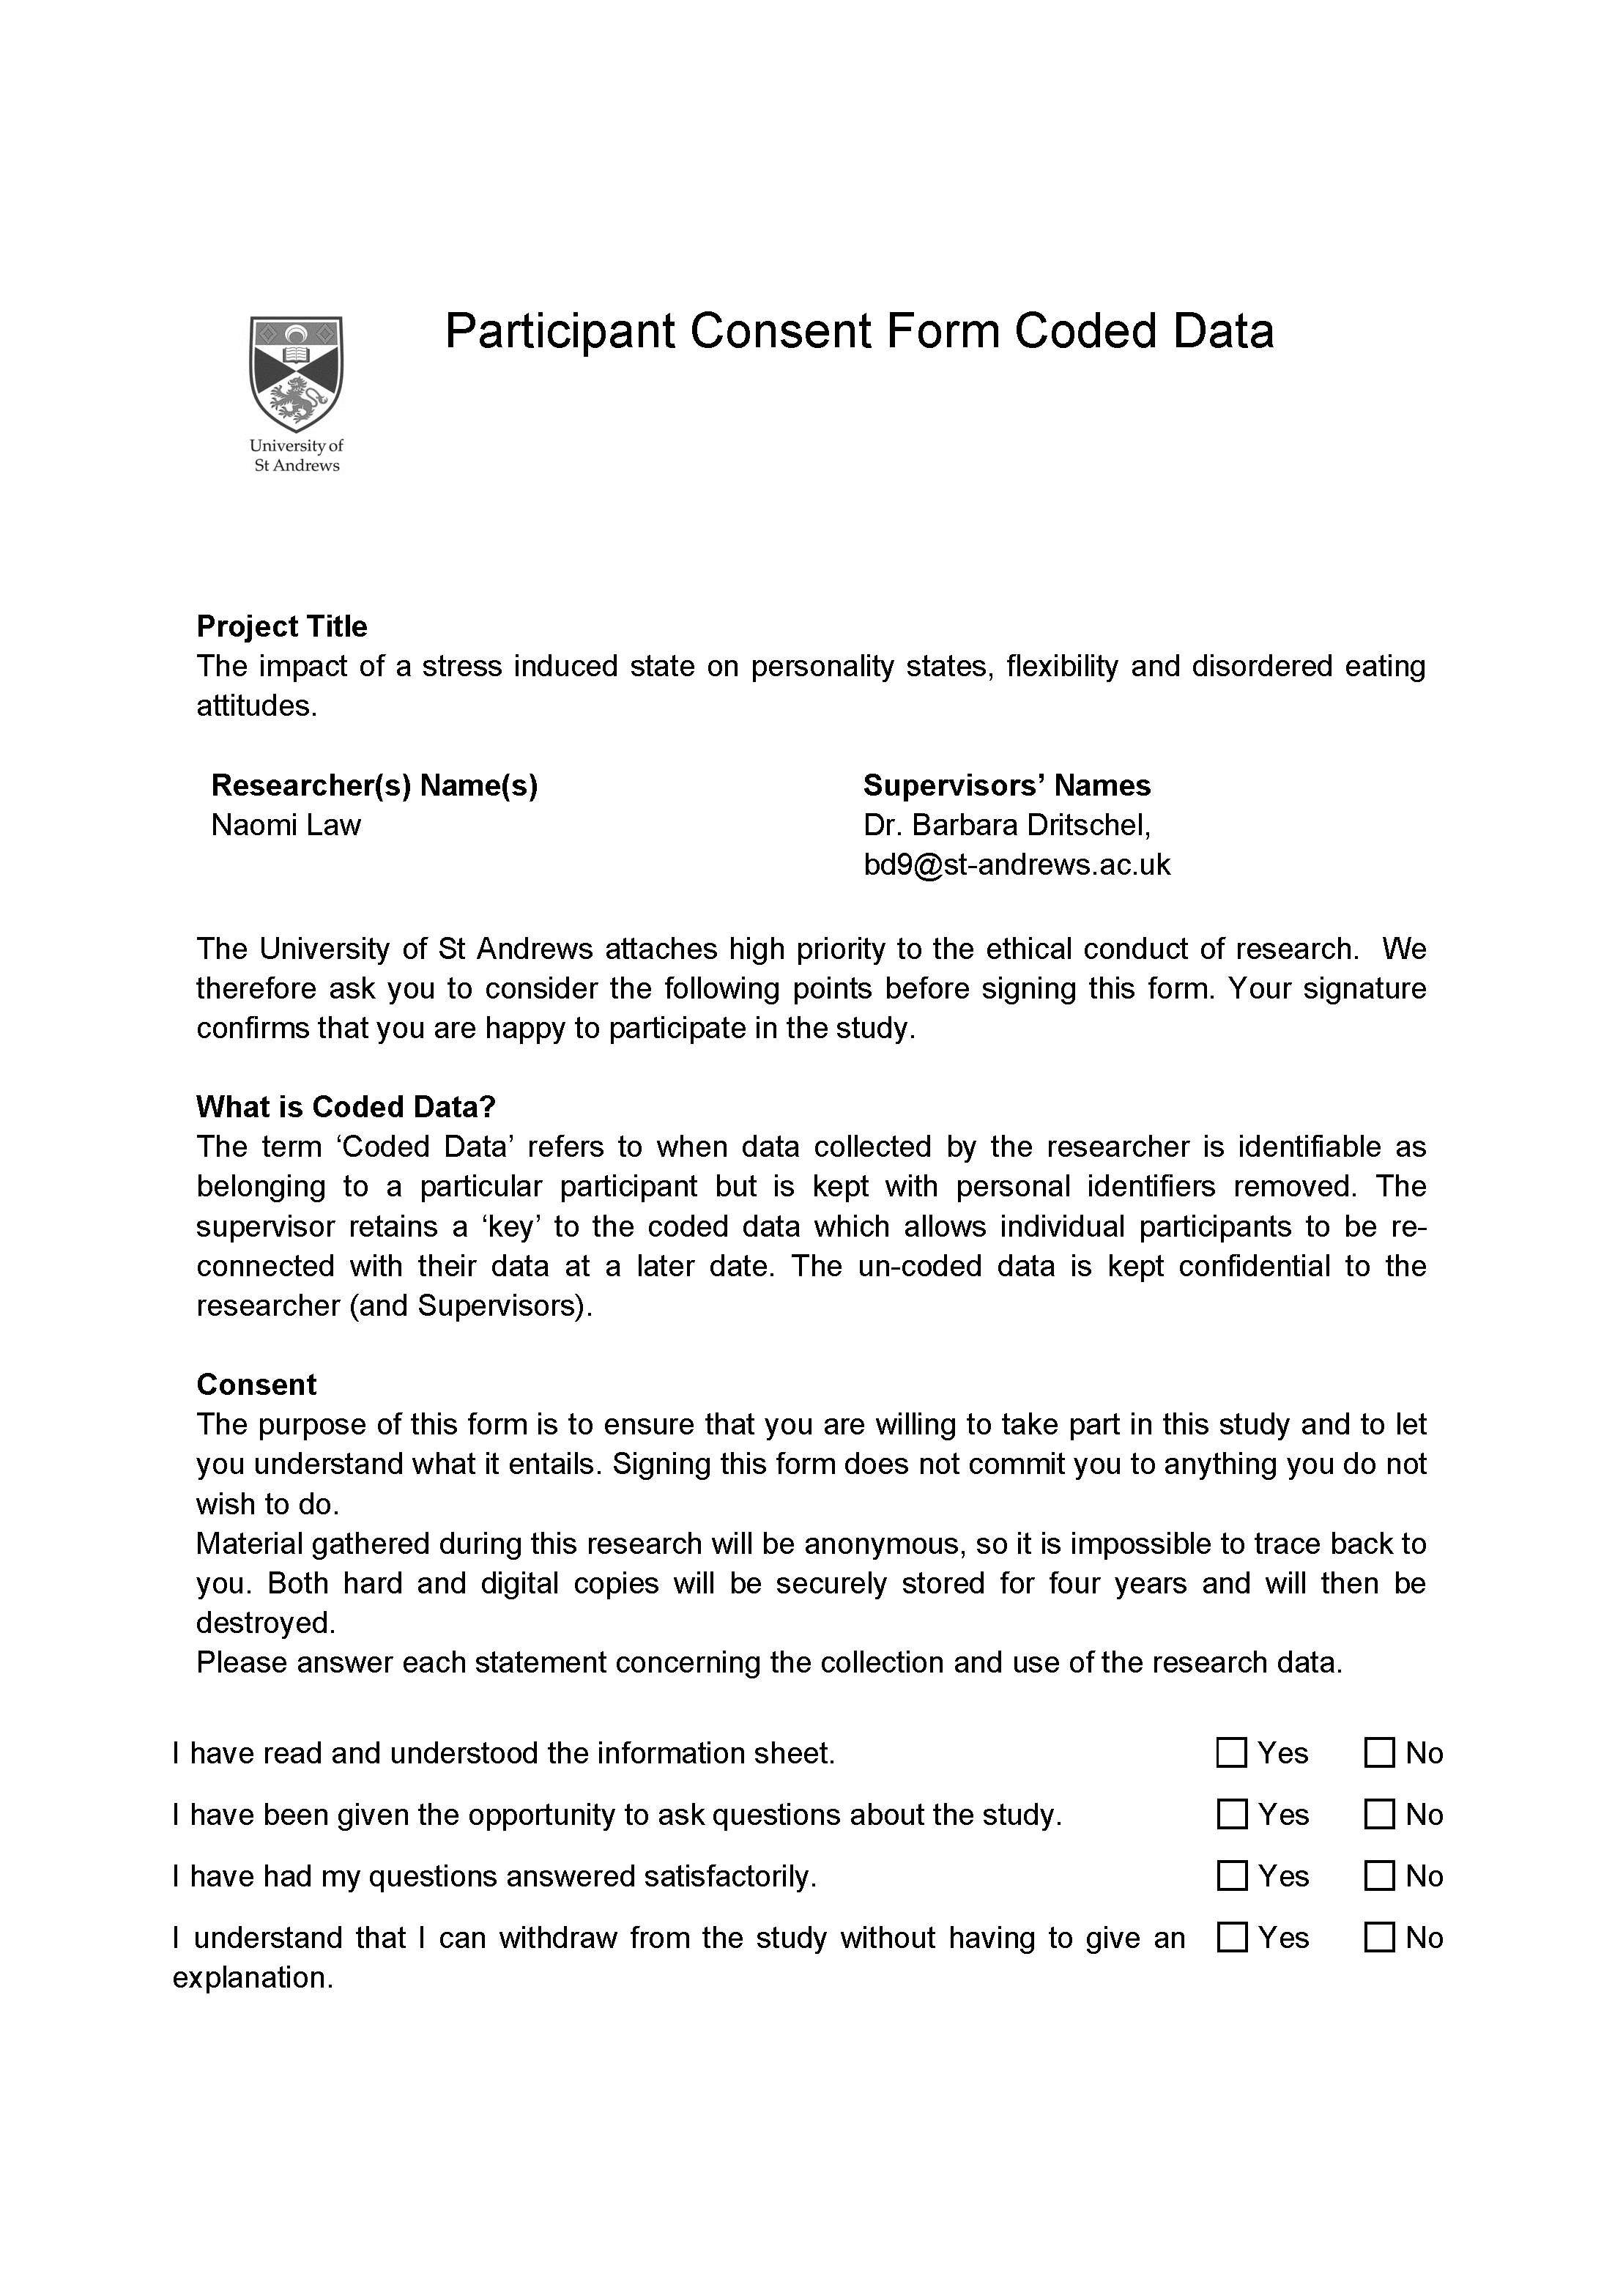 copy of the first page of a participant consent form